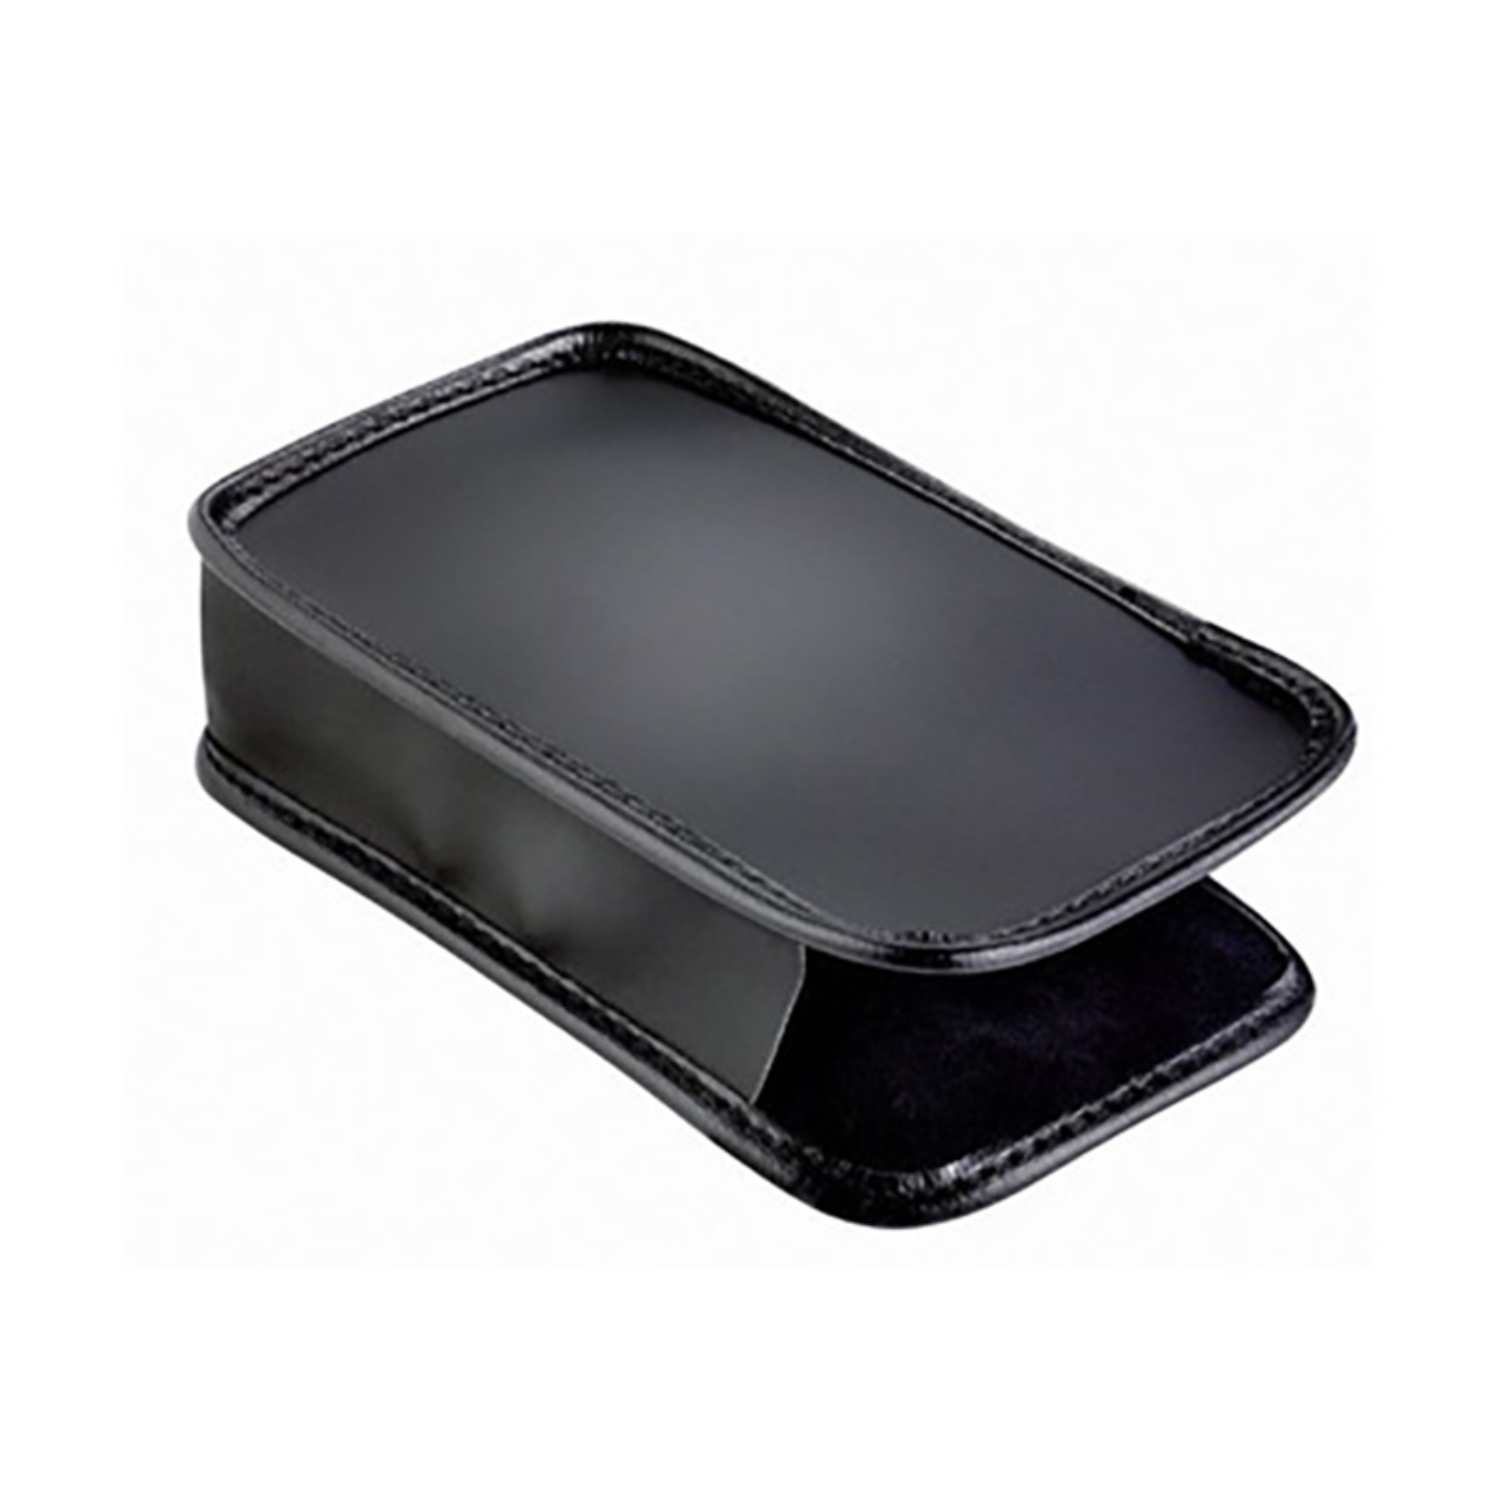 Image of the rectangular Protective Case for Aspheric II Hand-held Magnifiers from Eschenbach in charcoal gray.